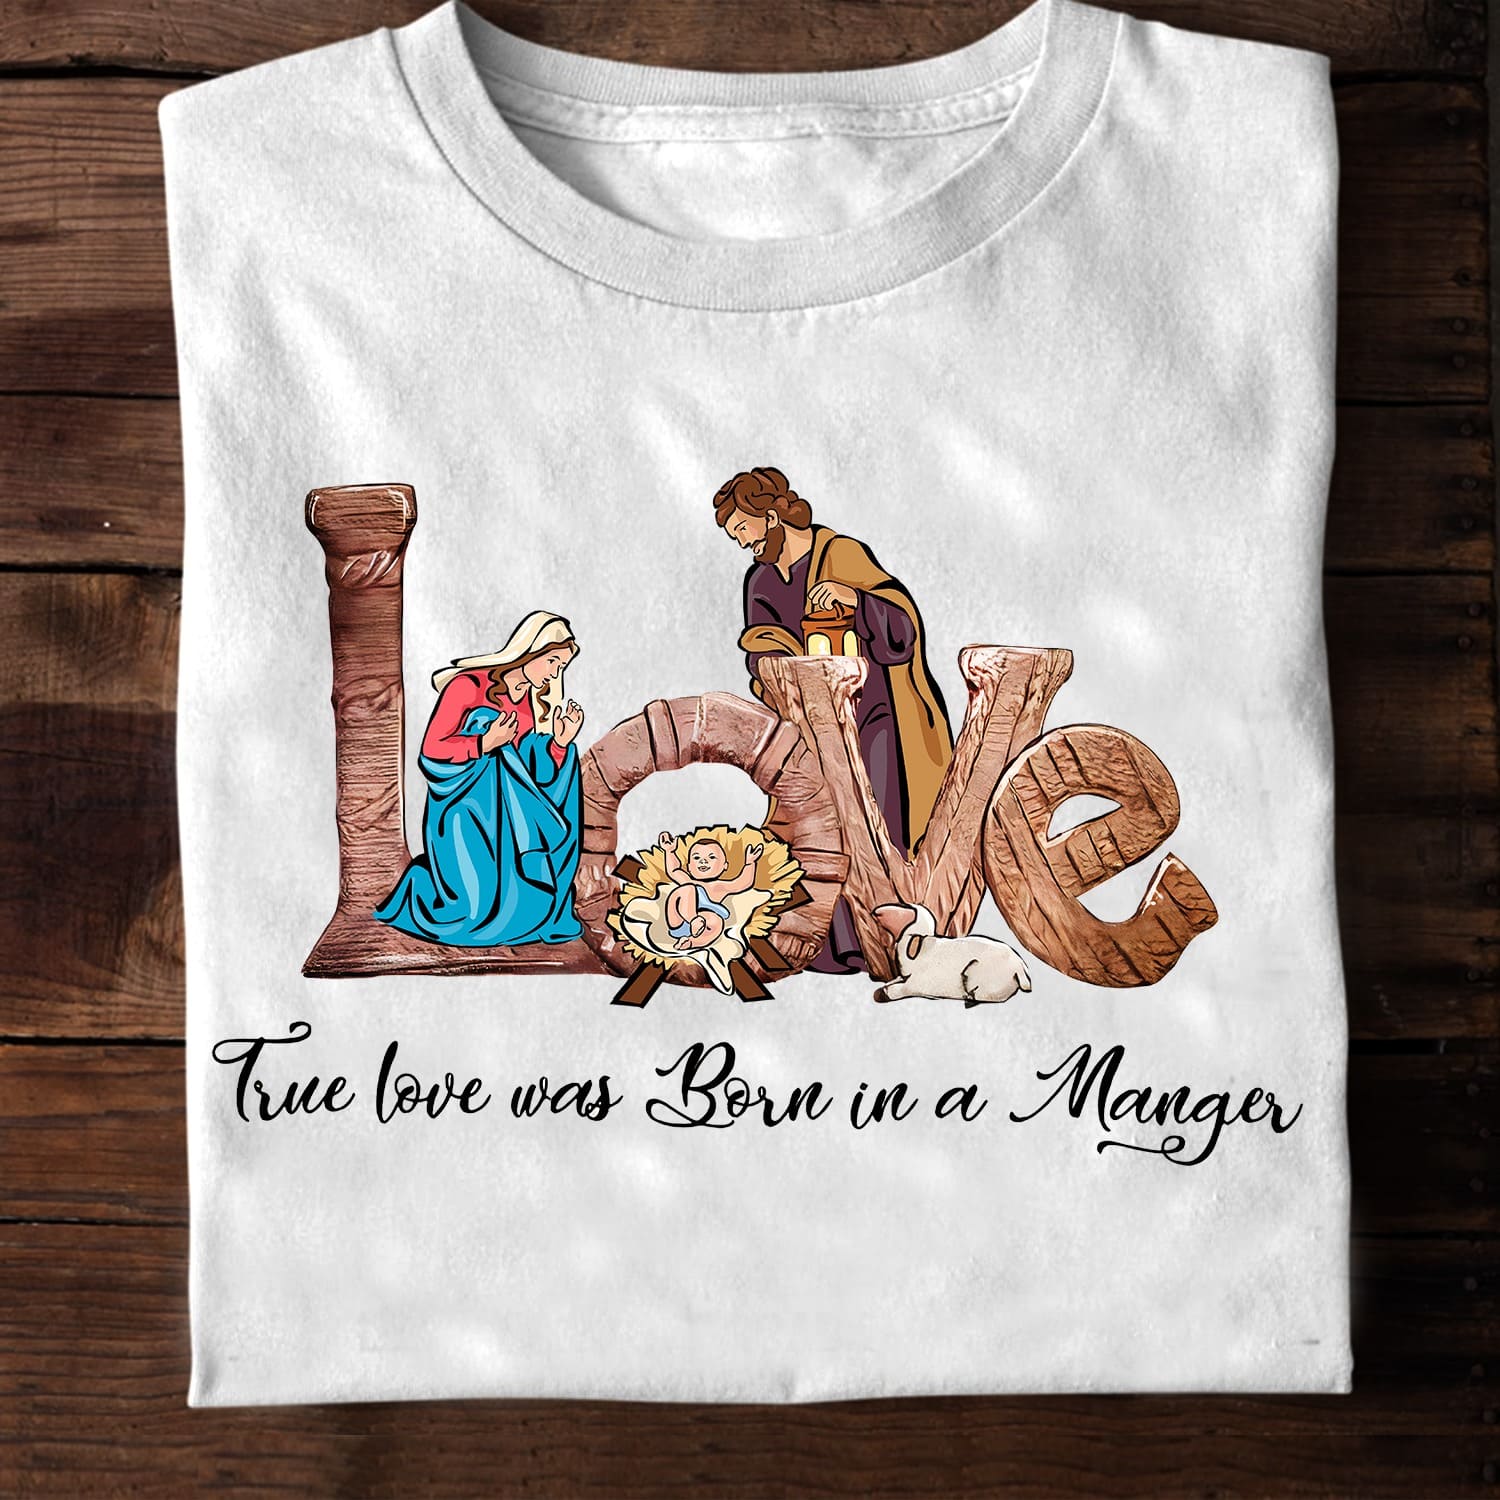 True love was born in a manger - Jesus date of birth, Christmas day T-shirt